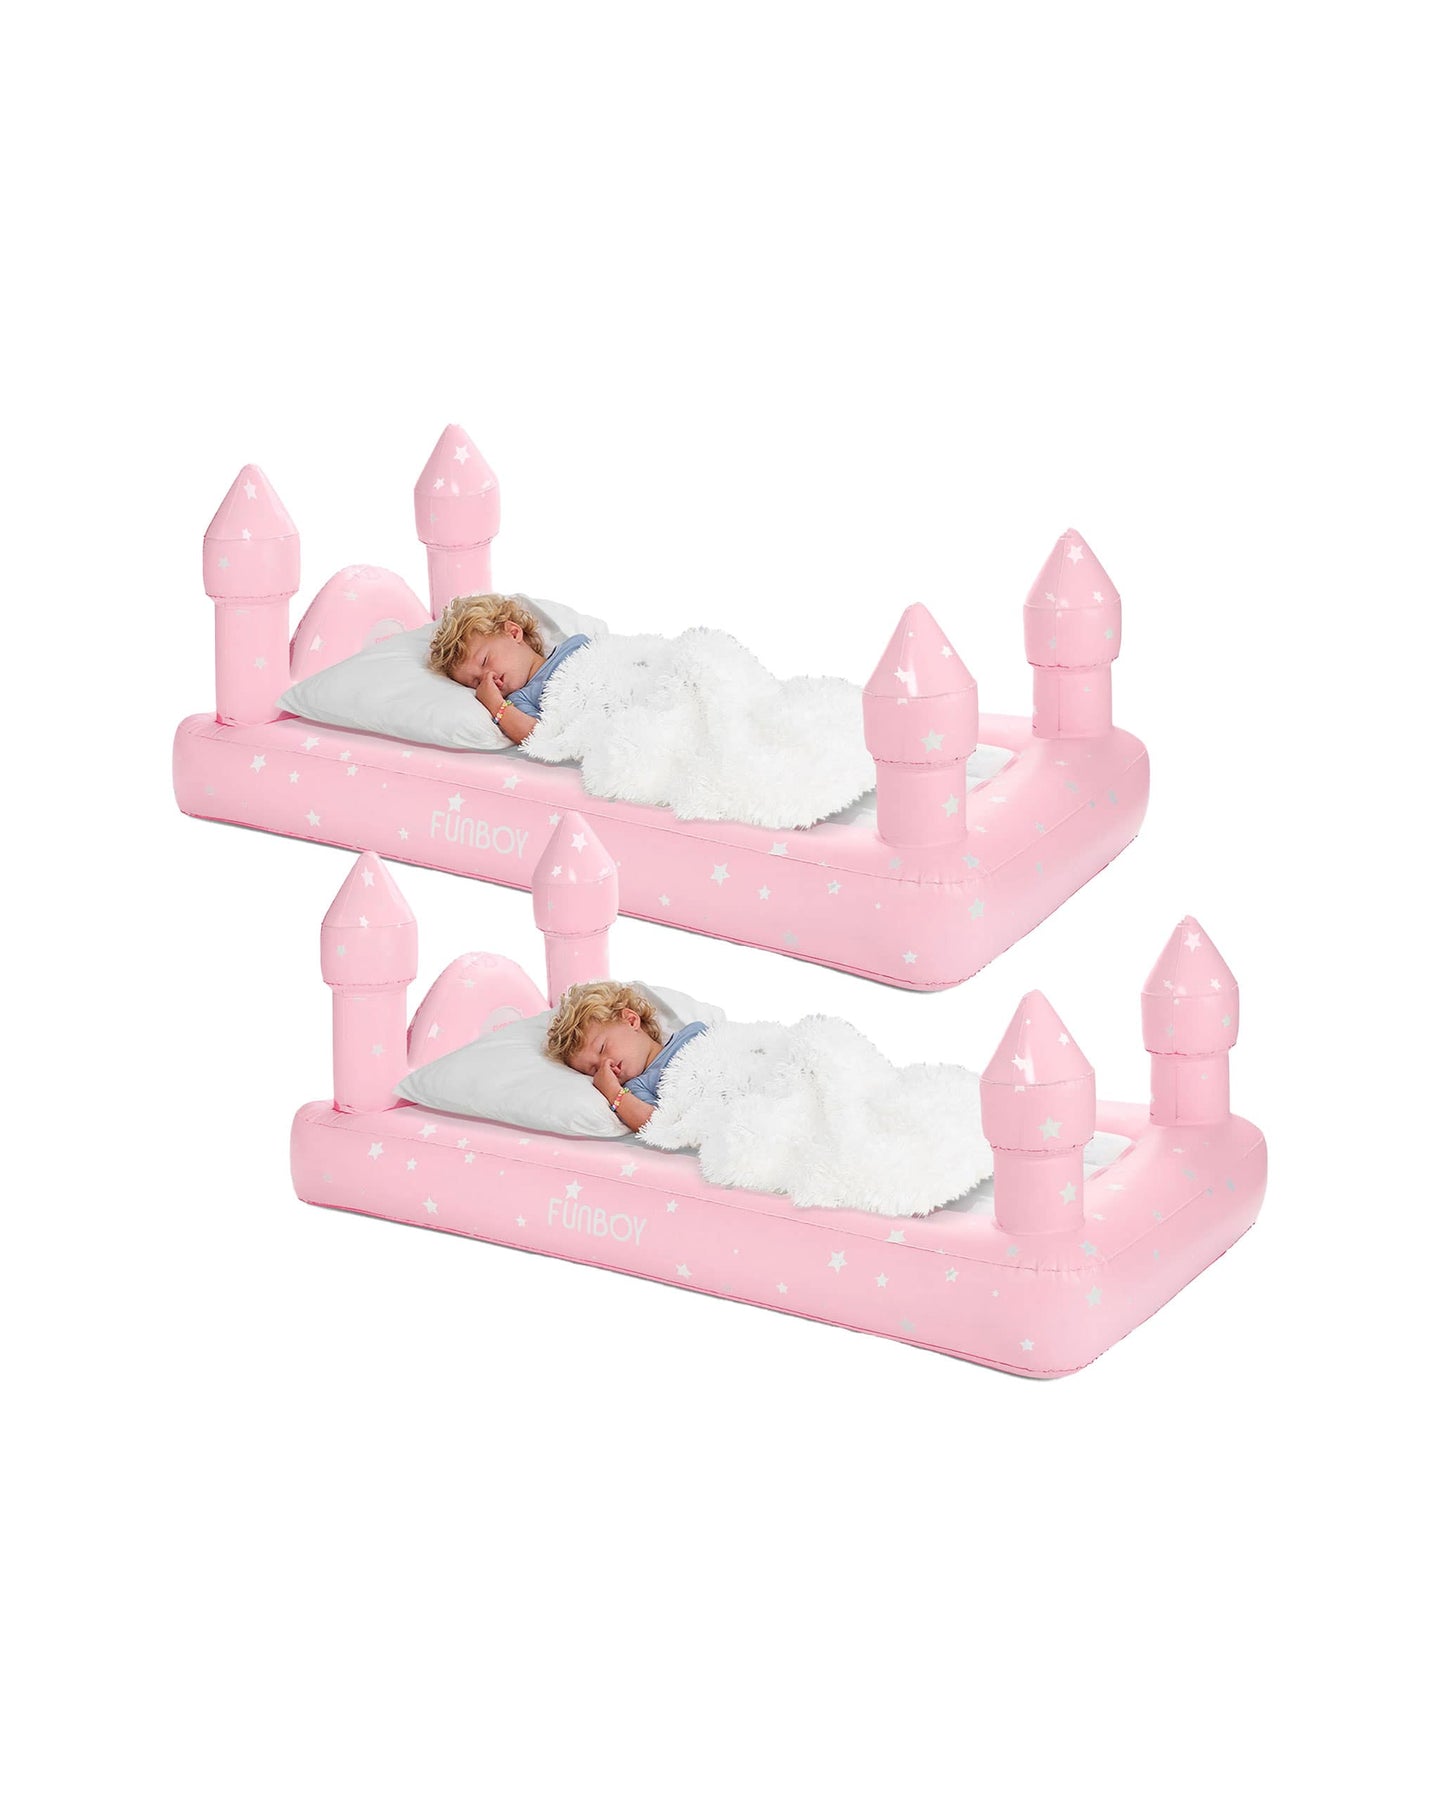 Kids Sleepover Bed - Pink Castle Airbed 